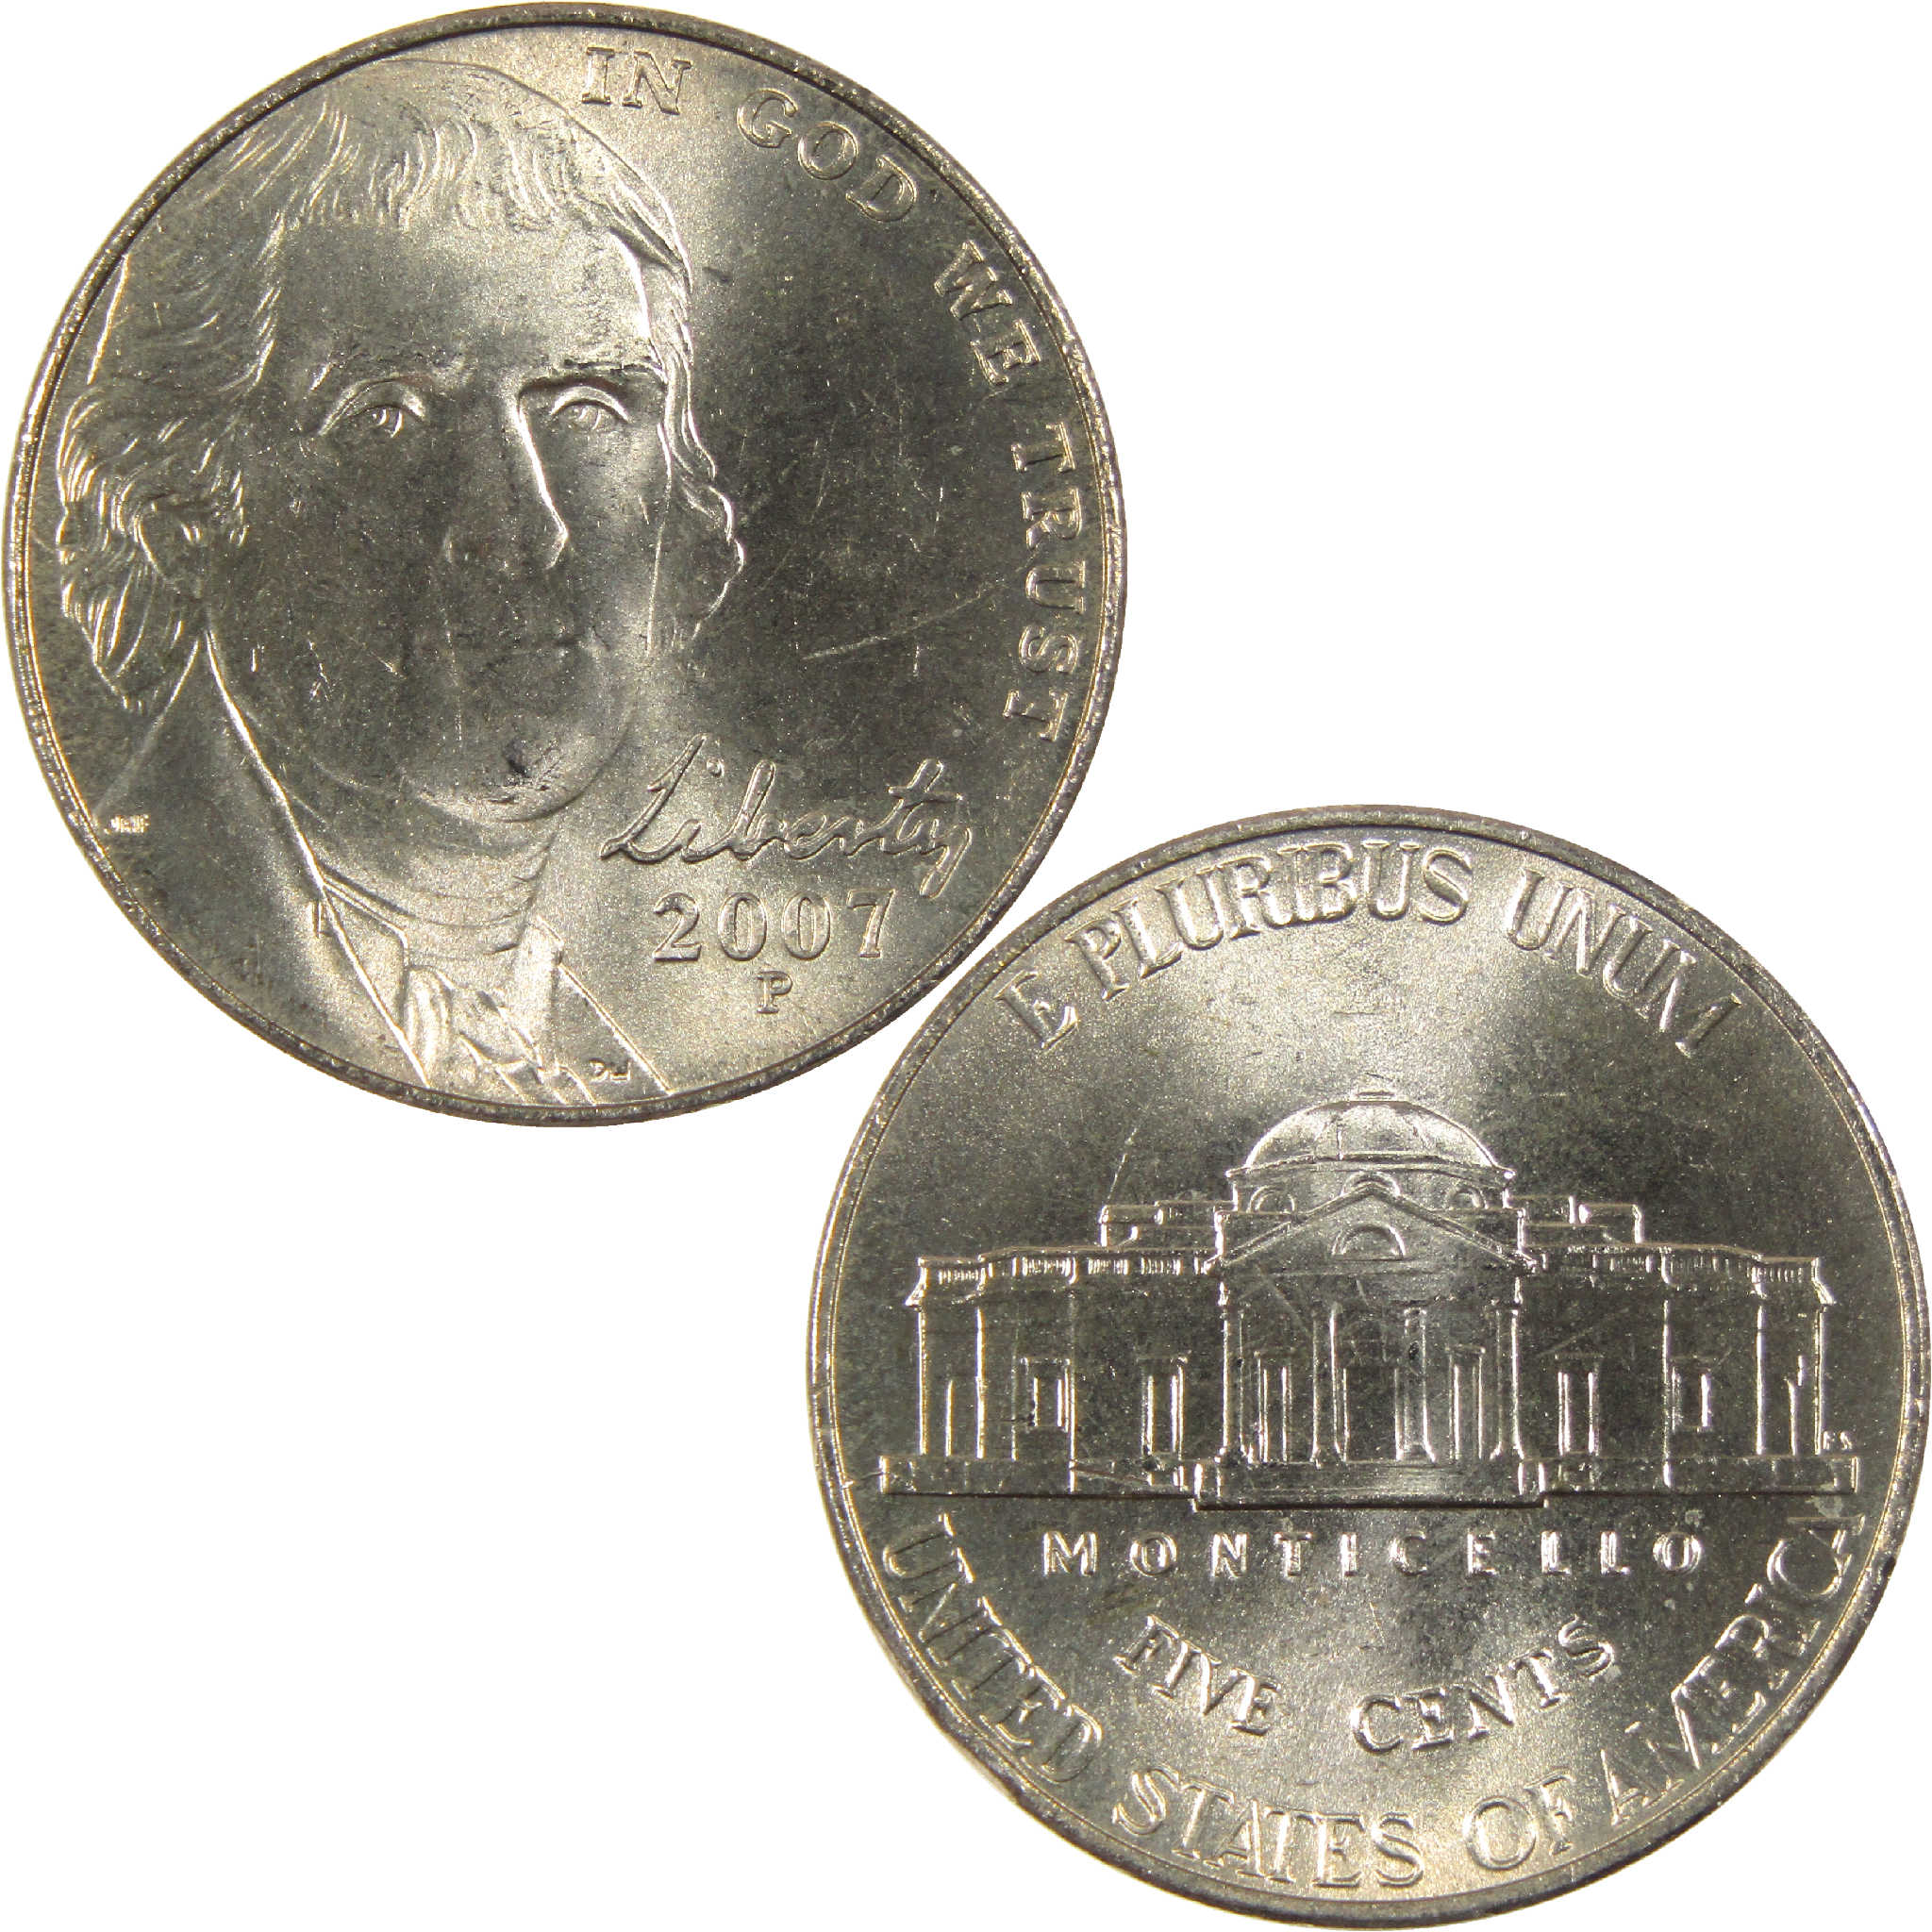 2007 P Jefferson Nickel Uncirculated 5c Coin